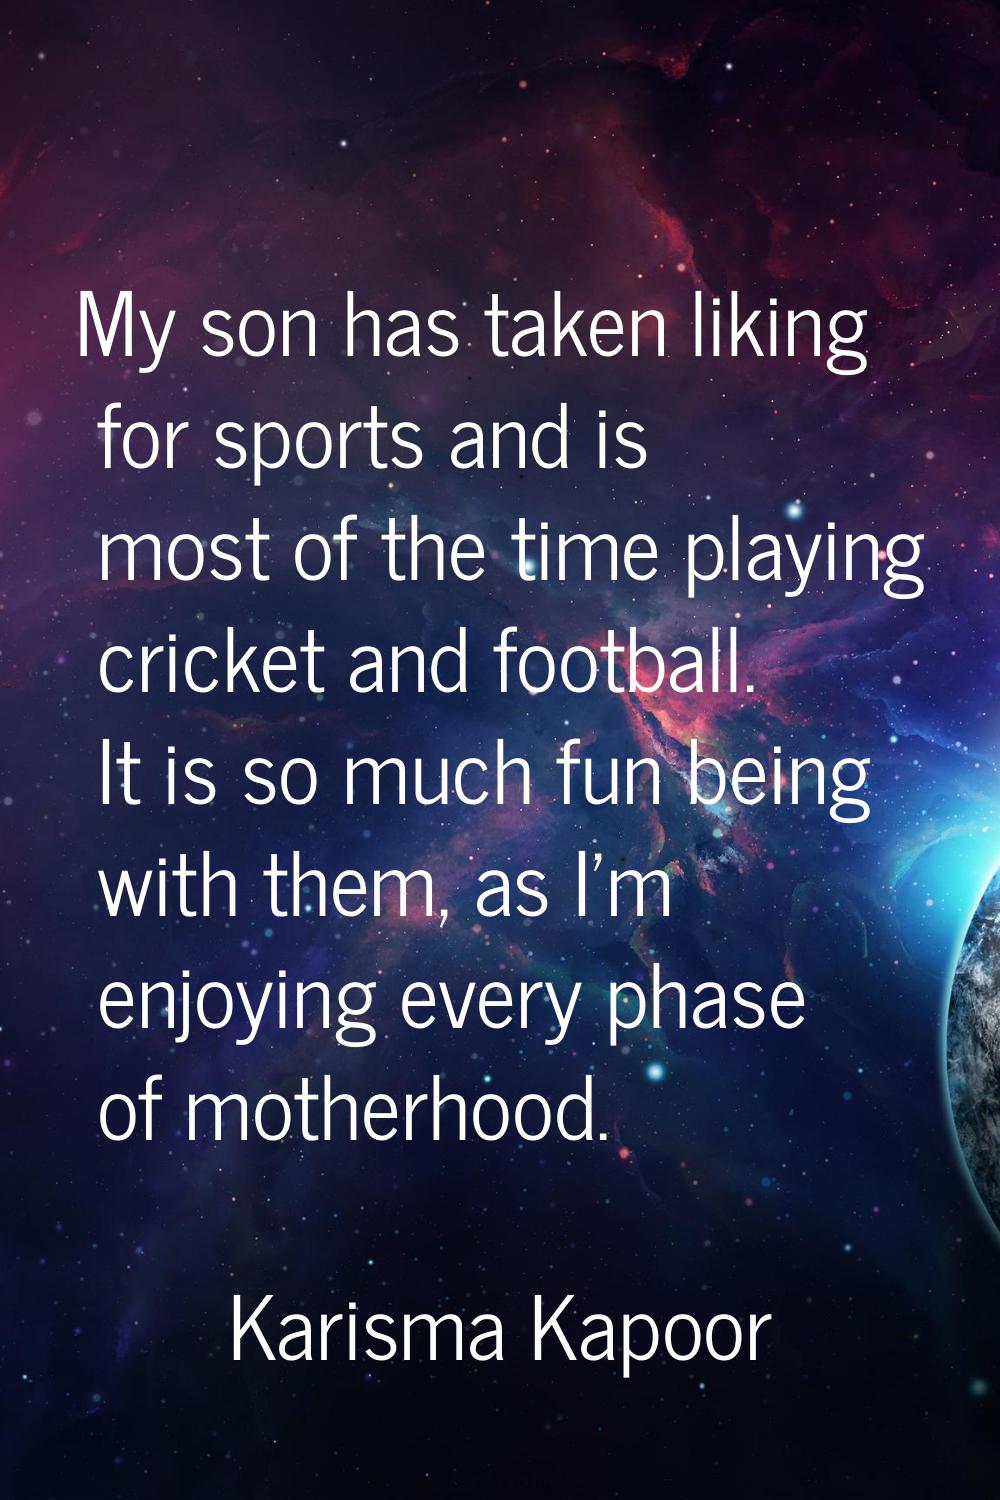 My son has taken liking for sports and is most of the time playing cricket and football. It is so m